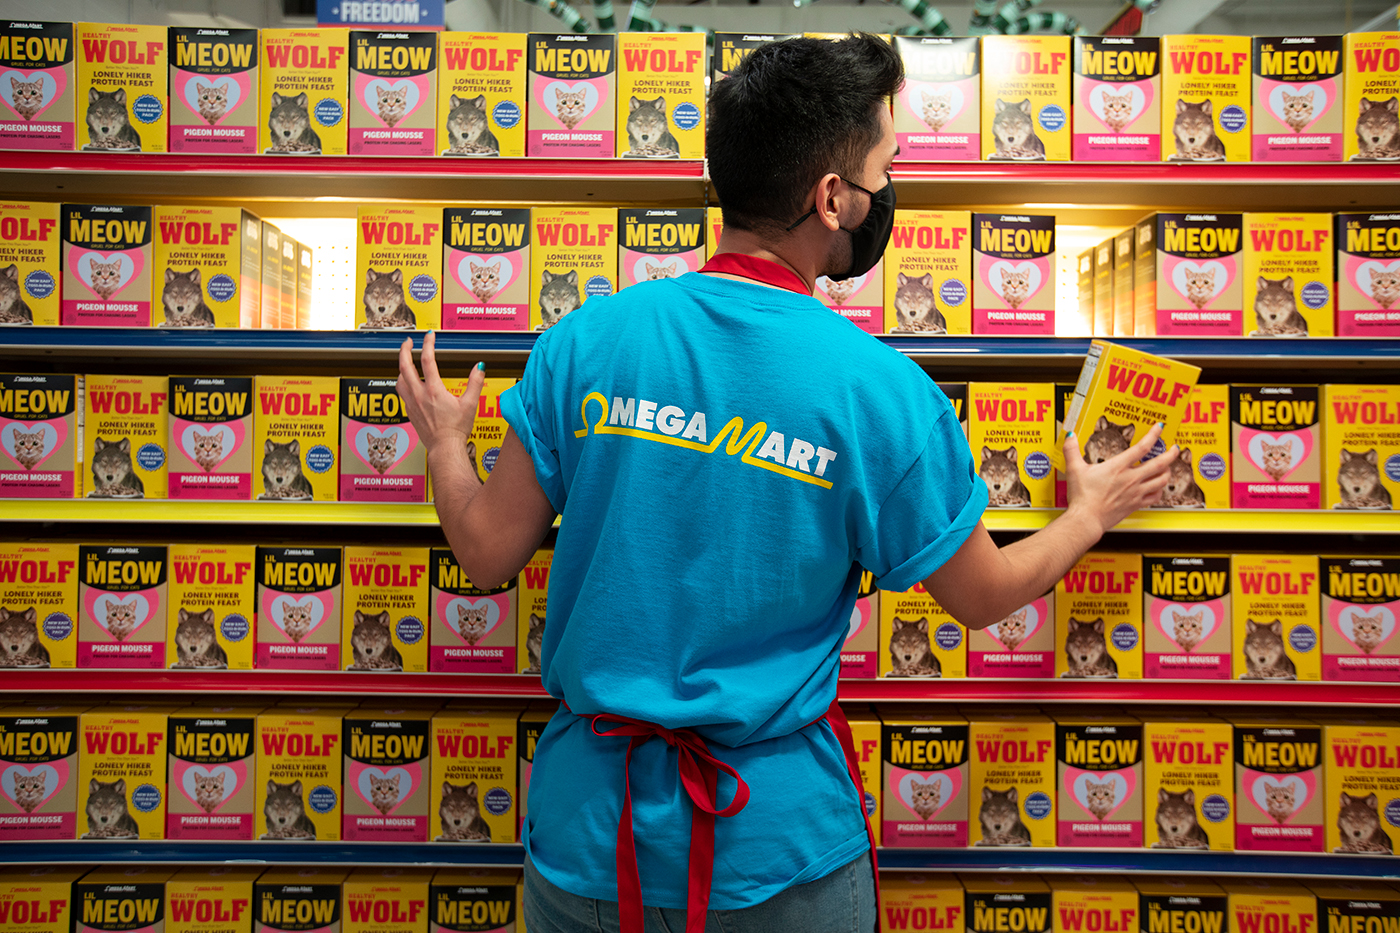 Opening Thursday, February 18th in Las Vegas, Meow Wolf’s Omega Mart is ready to welcome visitors. Pictured here is one of our friendly, informed employees restocking the shelves.